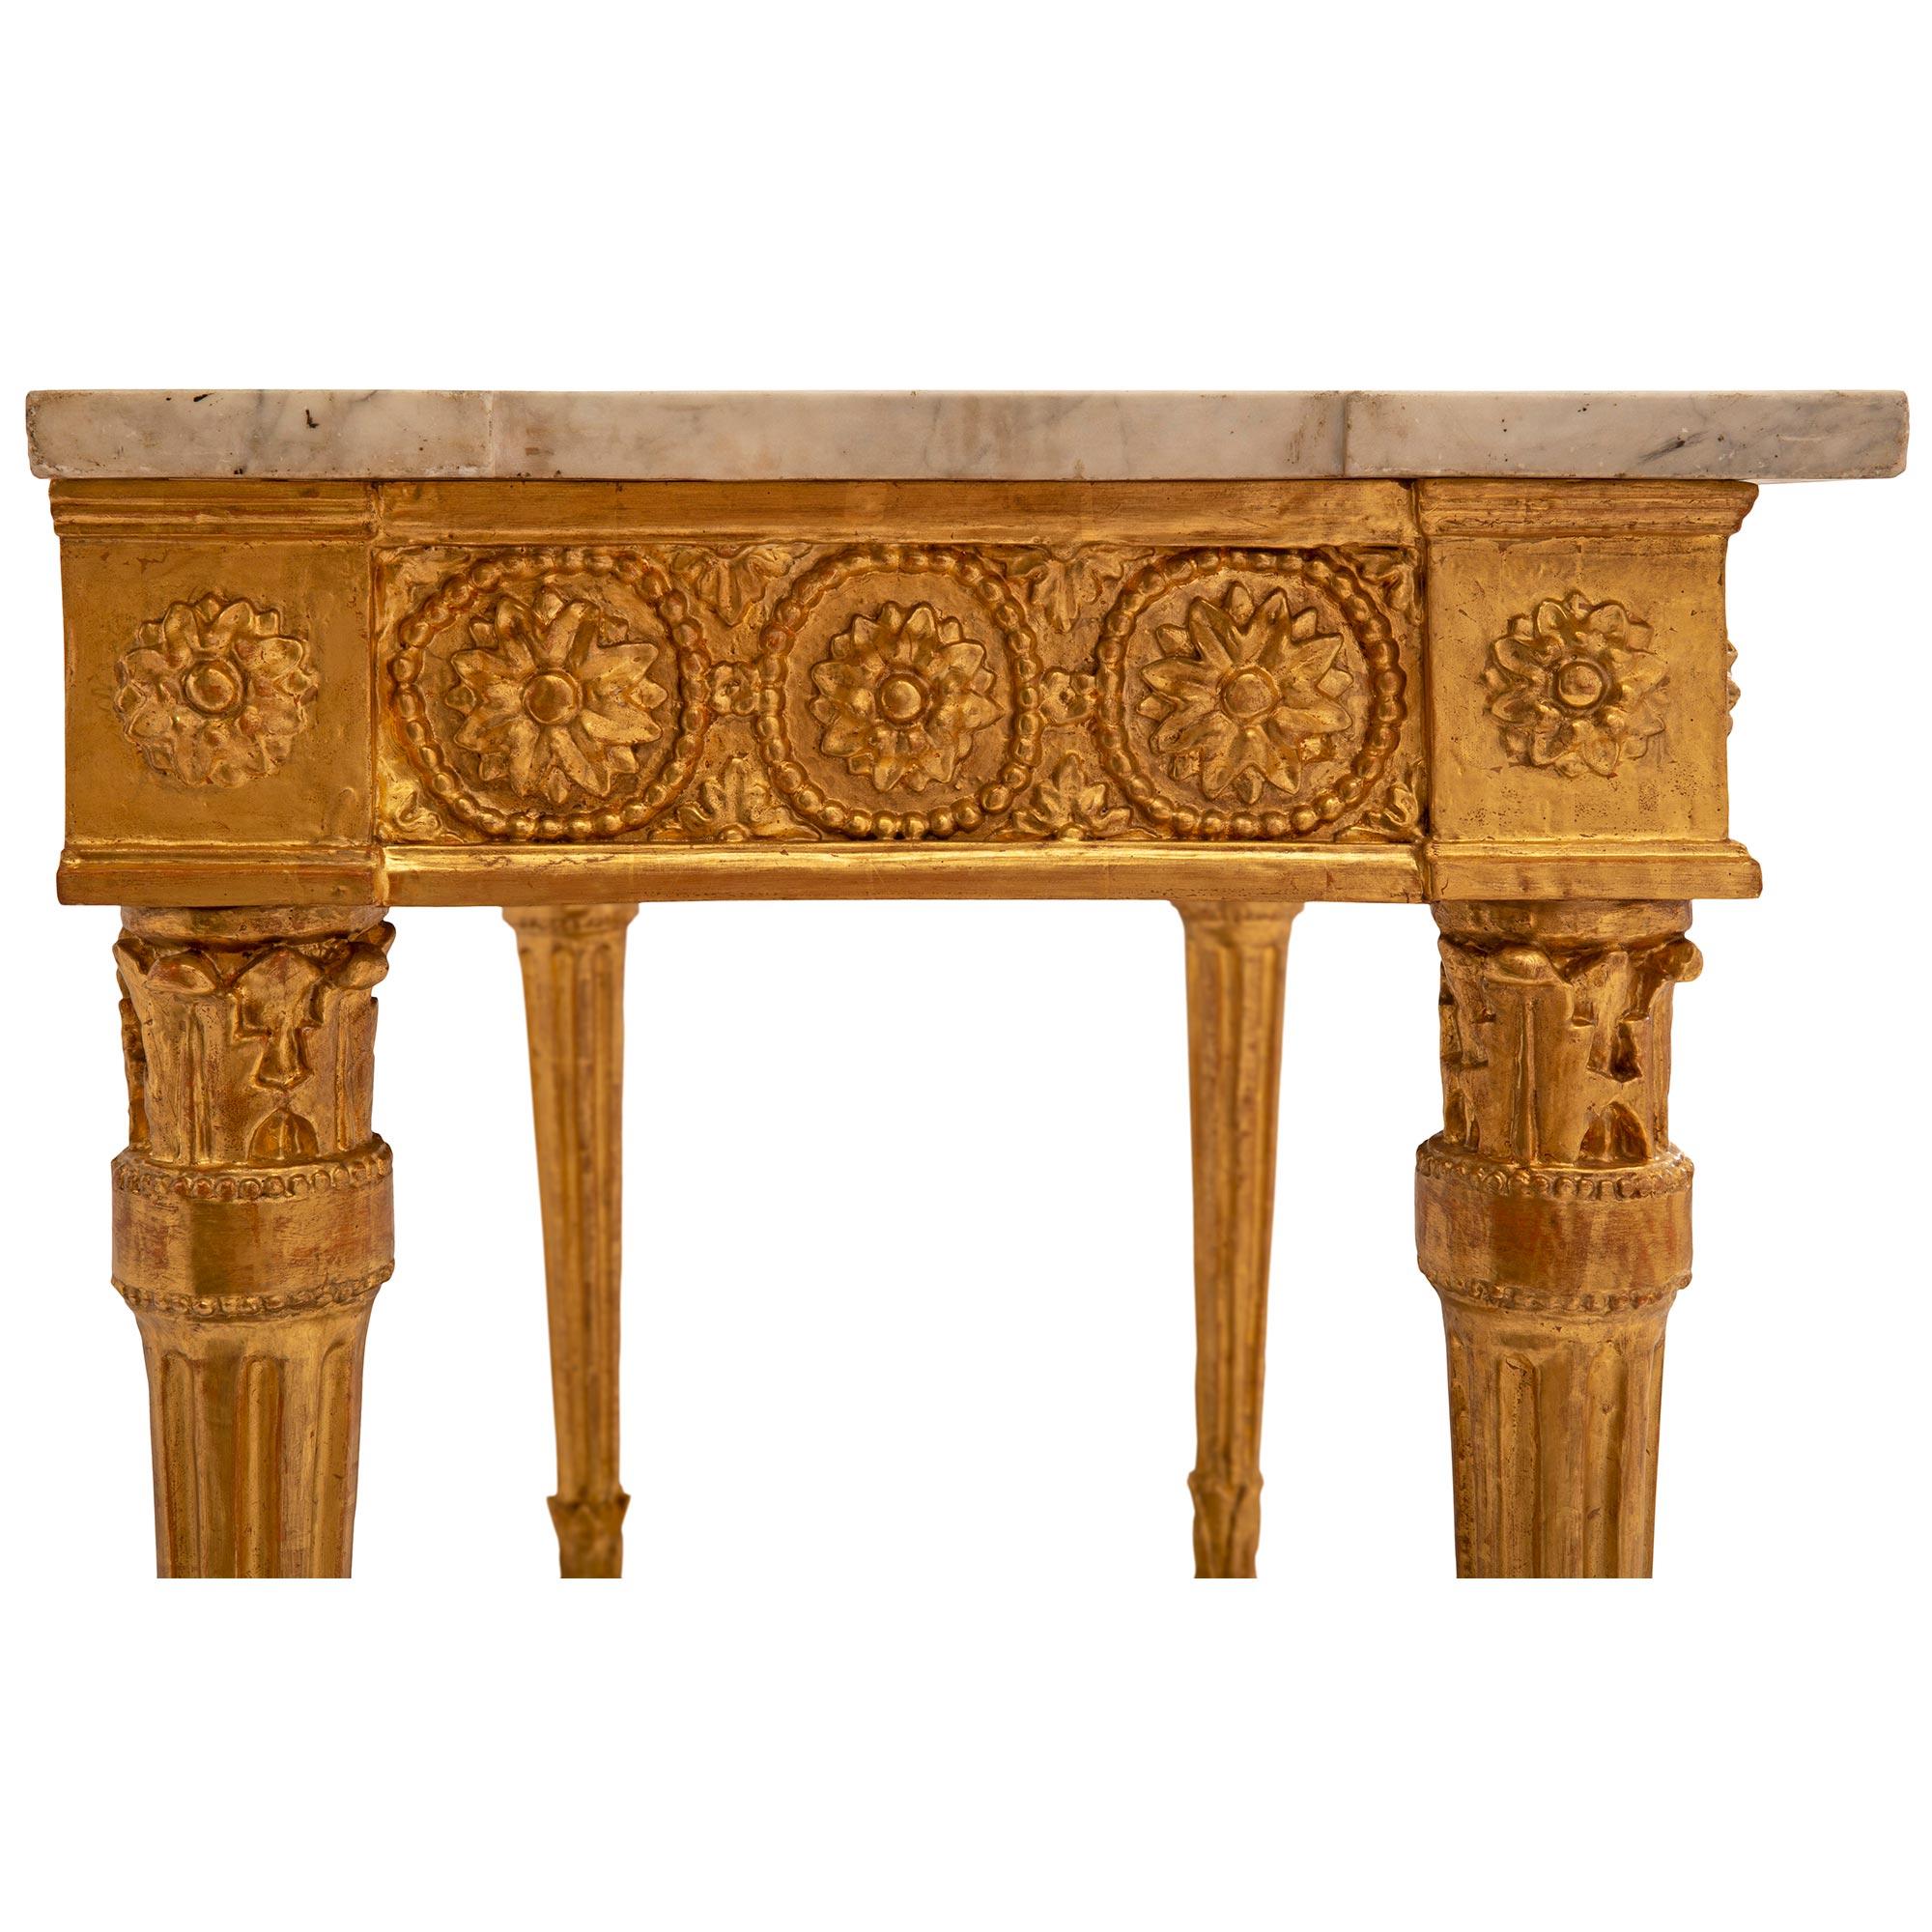 Italian 18th Century Louis XVI Period Giltwood, Polychrome and Marble Console For Sale 3